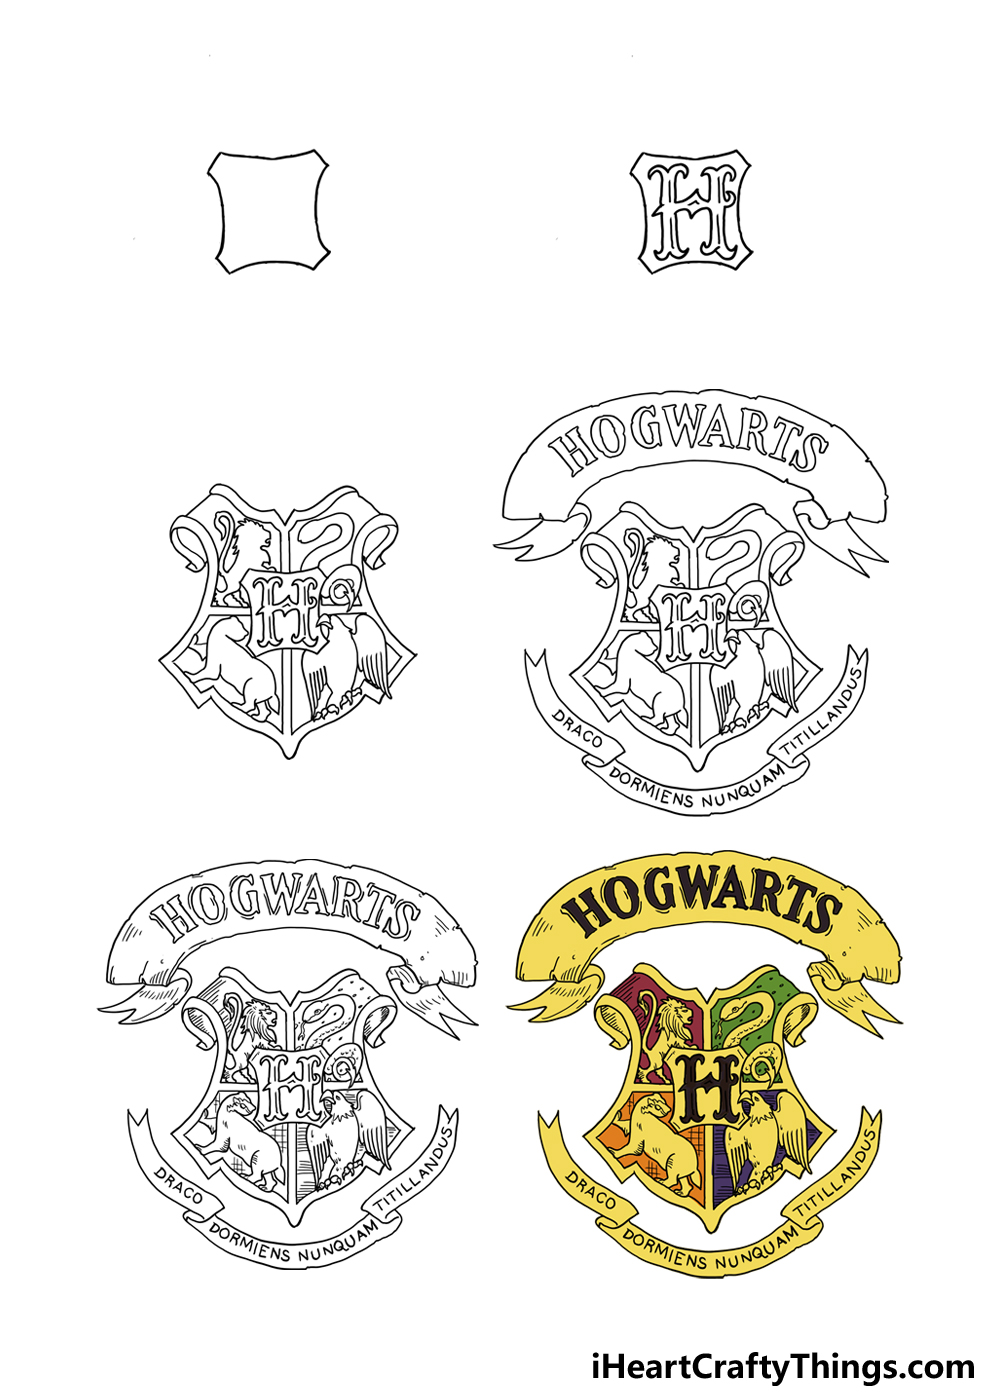 How to Draw The Hogwarts Crest